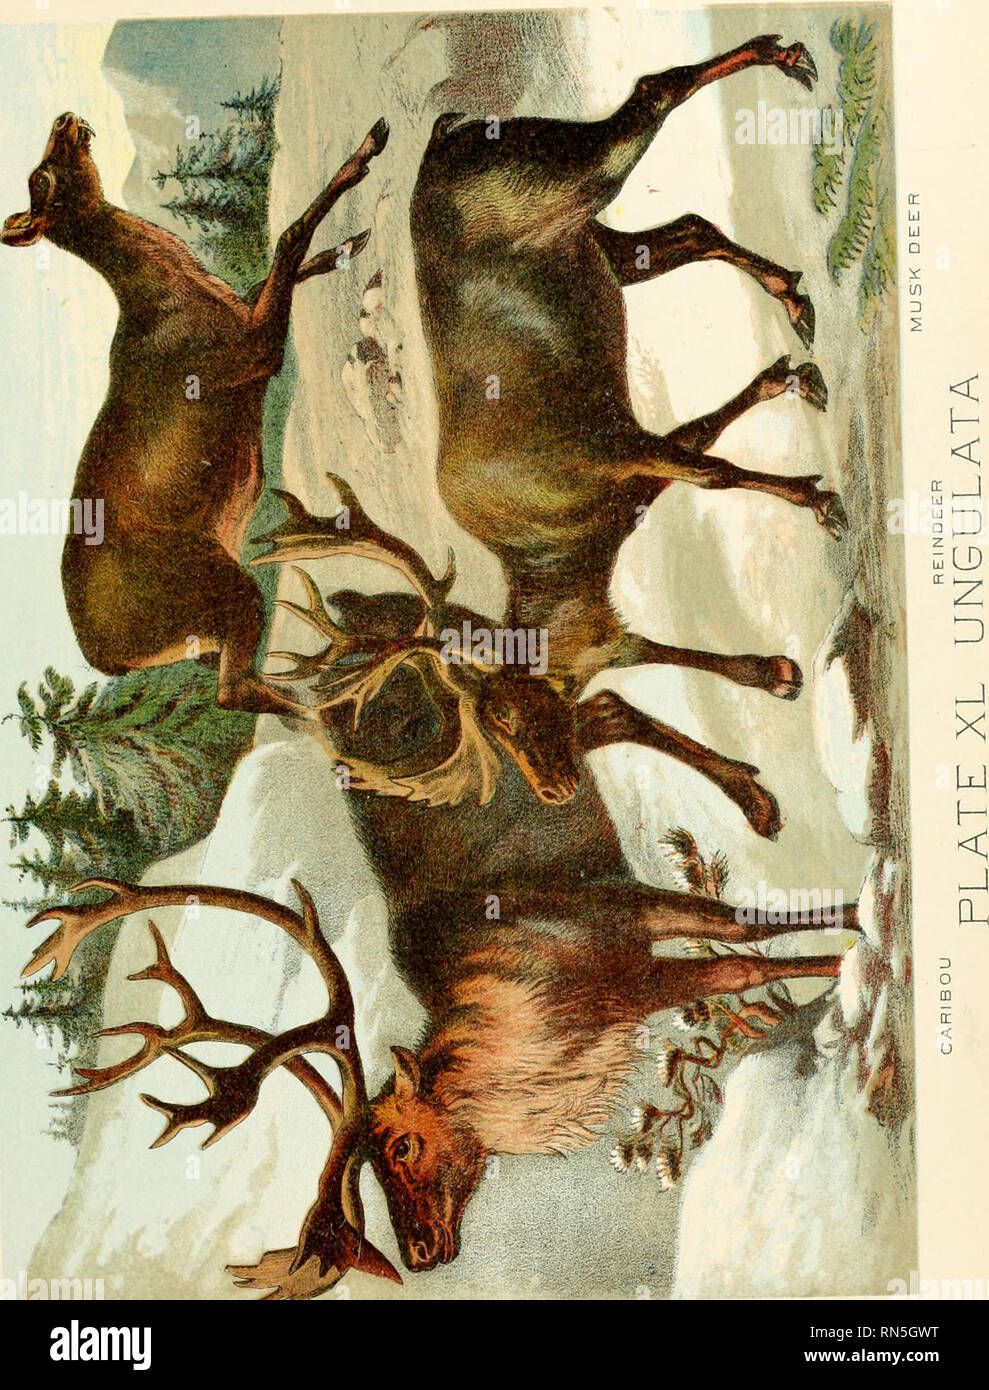 https://c8.alamy.com/comp/RN5GWT/the-animal-kingdom-based-upon-the-writings-of-the-eminent-naturalists-audubon-wallace-brehm-wood-and-others-mammals-please-note-that-these-images-are-extracted-from-scanned-page-images-that-may-have-been-digitally-enhanced-for-readability-coloration-and-appearance-of-these-illustrations-may-not-perfectly-resemble-the-original-work-craig-hugh-new-york-johnson-amp-bailey-RN5GWT.jpg